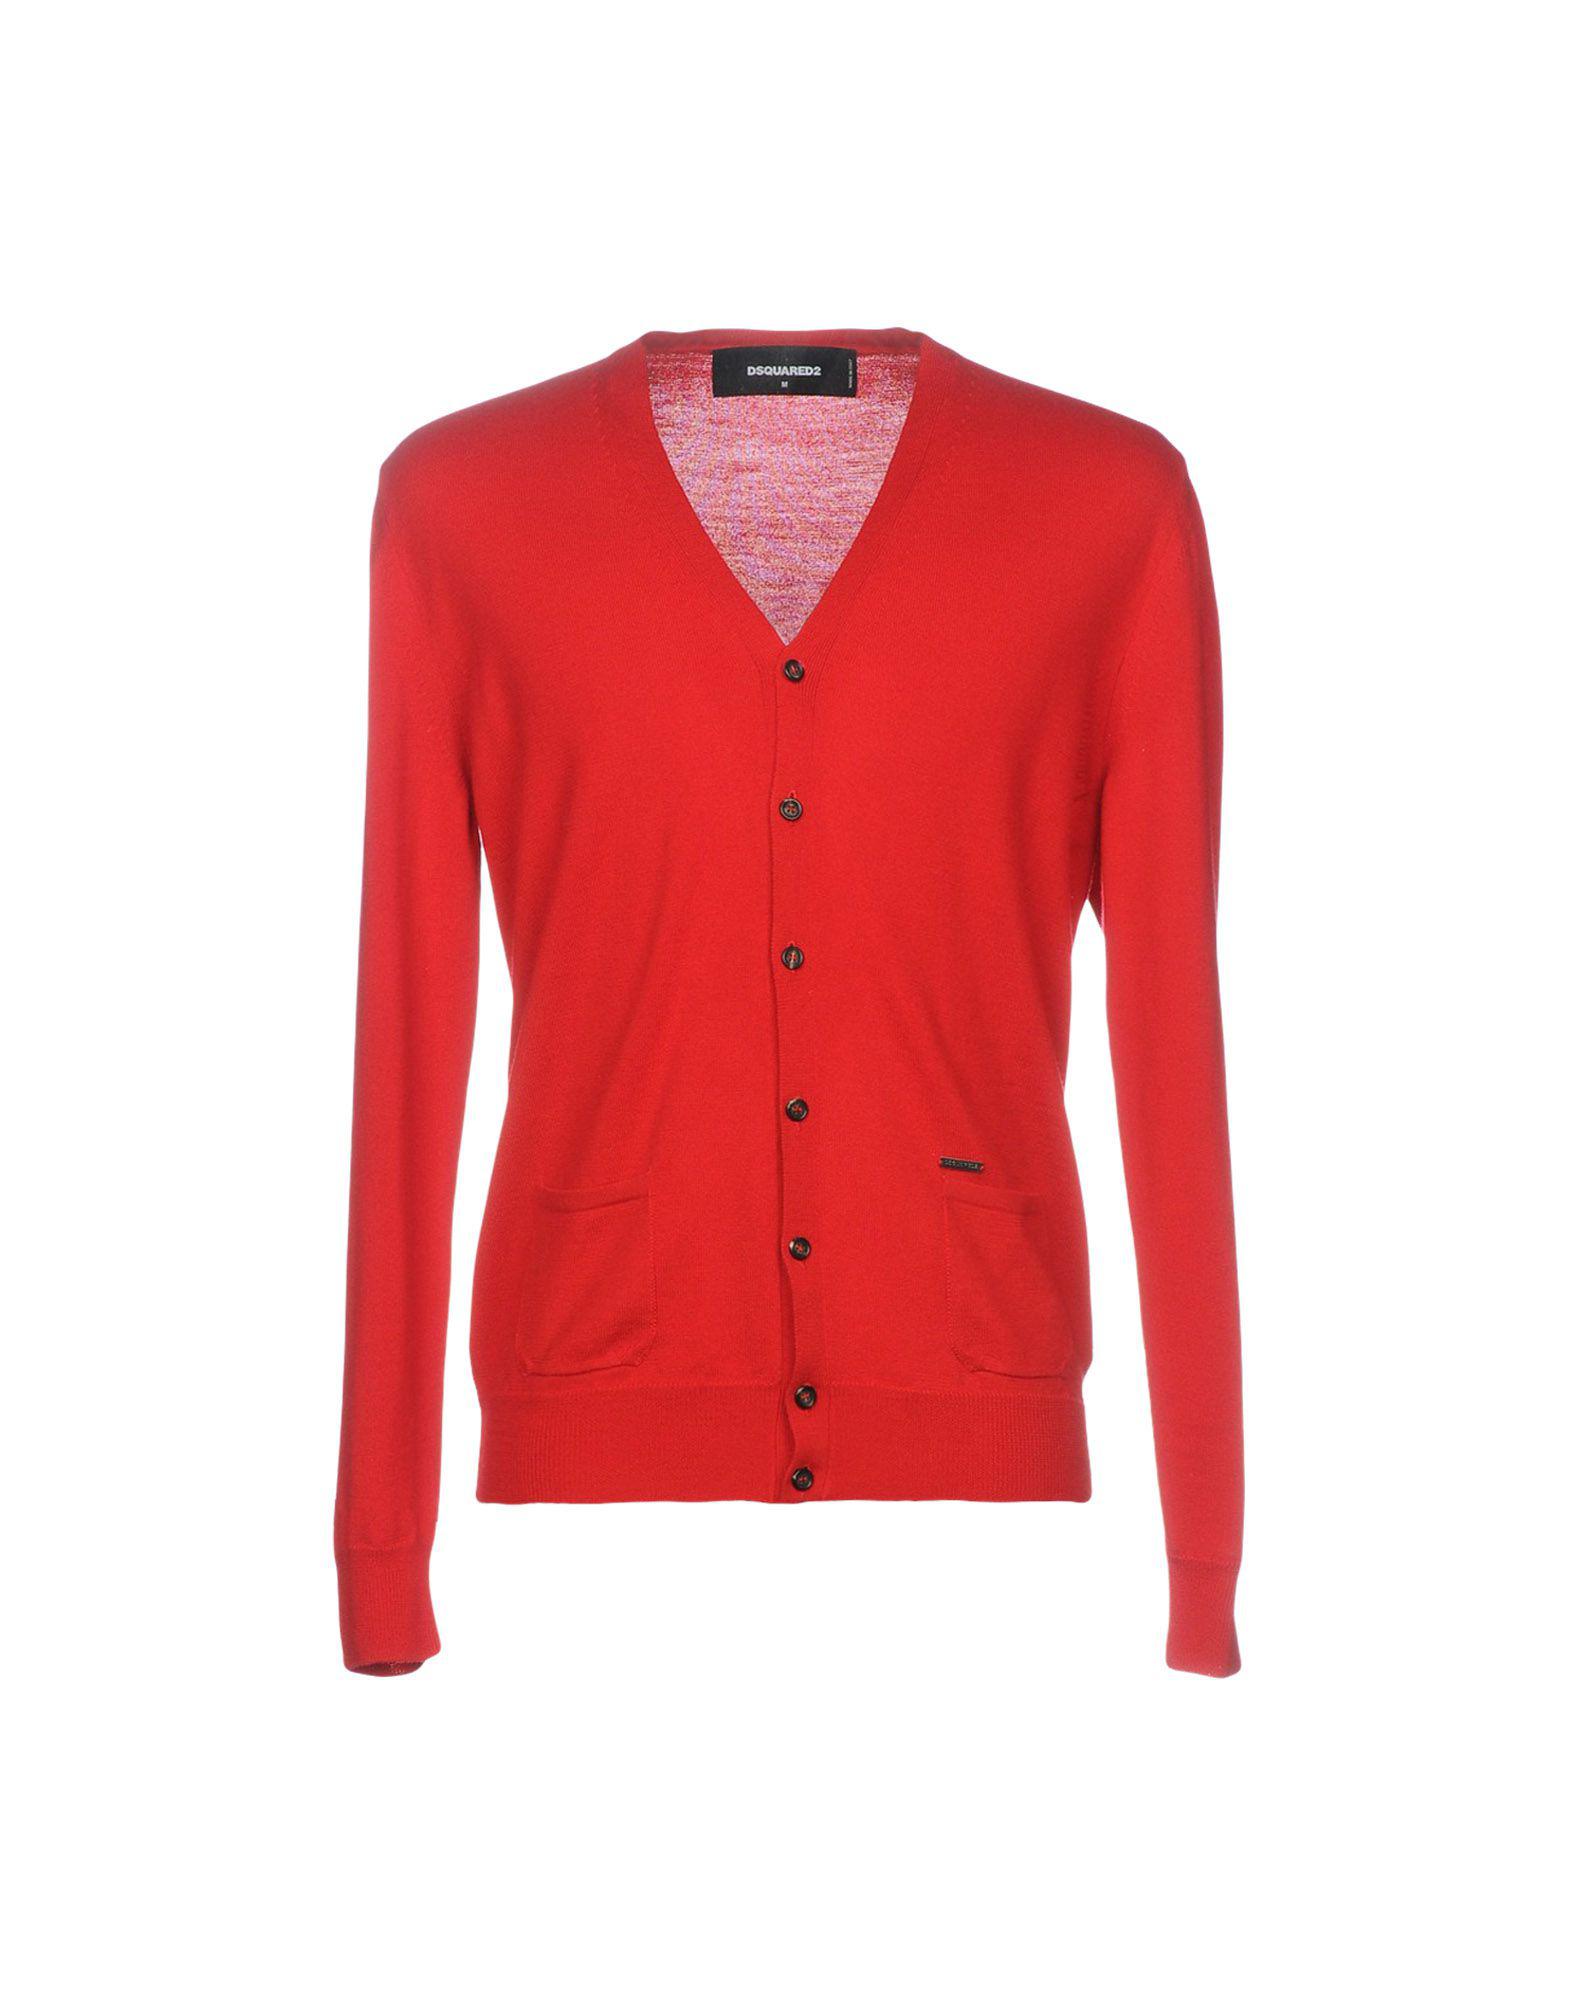 DSquared² Wool Cardigan in Red for Men - Lyst